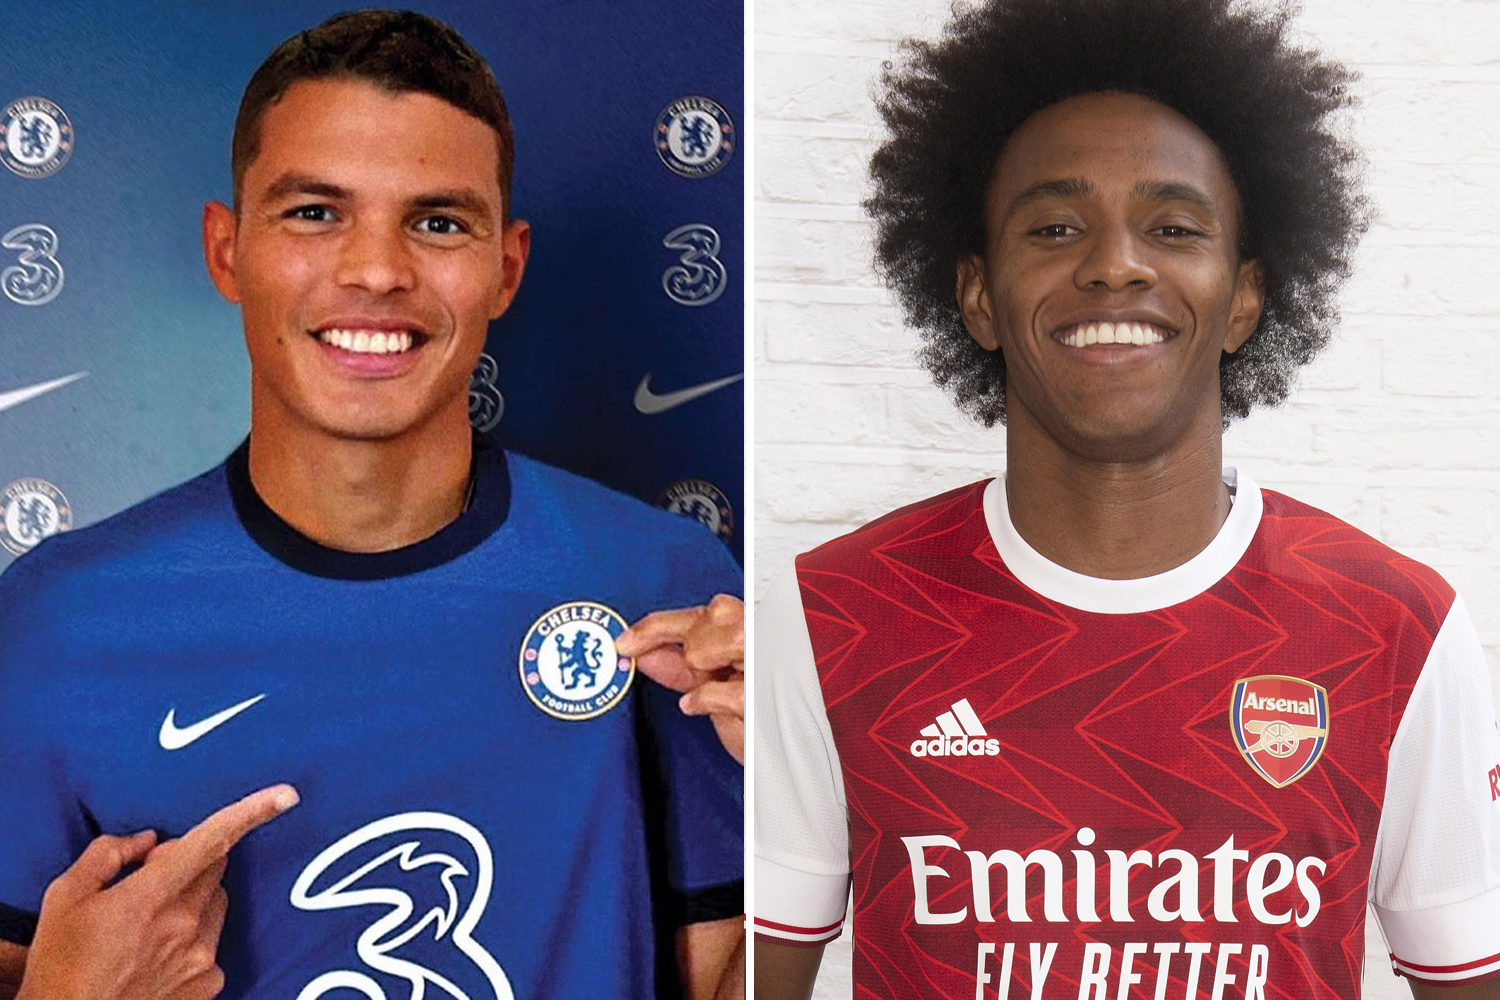 Willian jokingly told Thiago Silva he would have STAYED at Chelsea for him